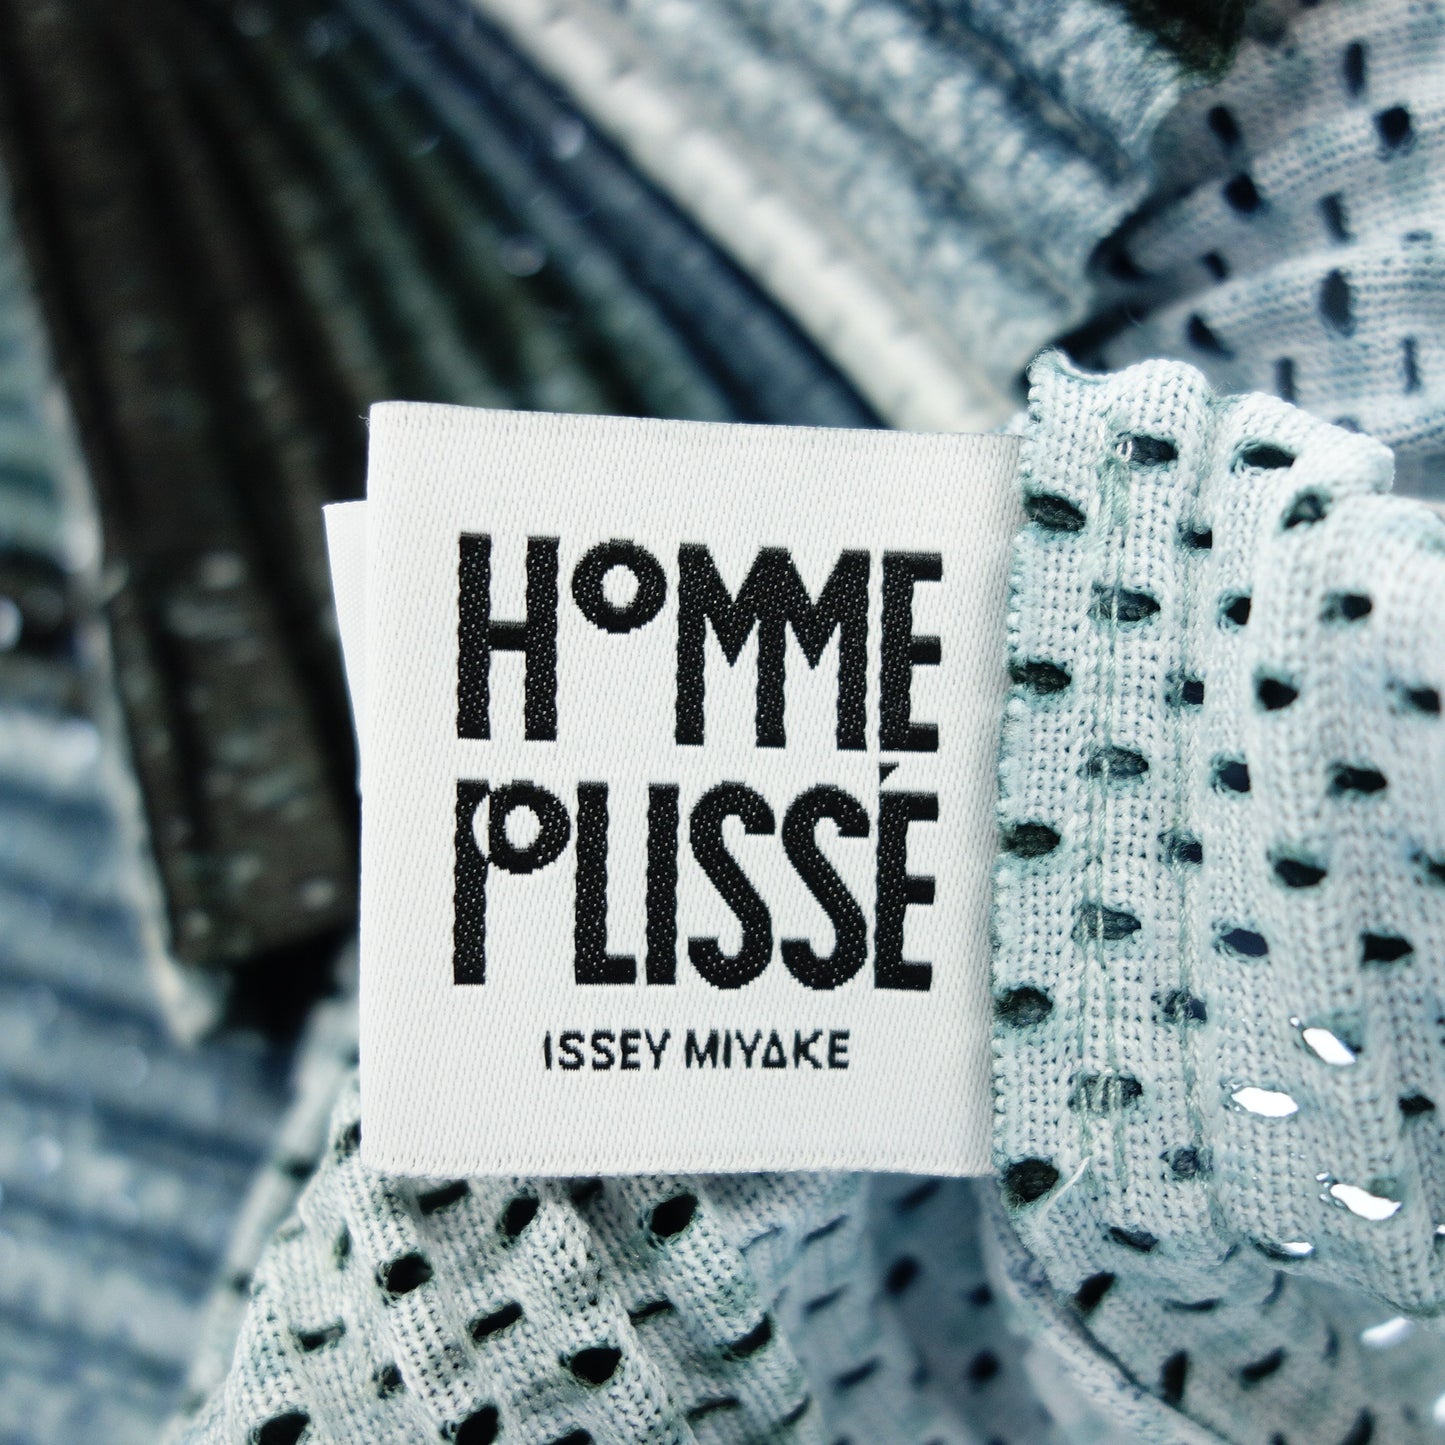 ISSEY MIYAKE HOMME PLISSE T 恤 全图案短袖 HP91JK154 男士 绿色 3 ISSEY MIYAKE HOMME PLISSE [AFB47] [二手] 